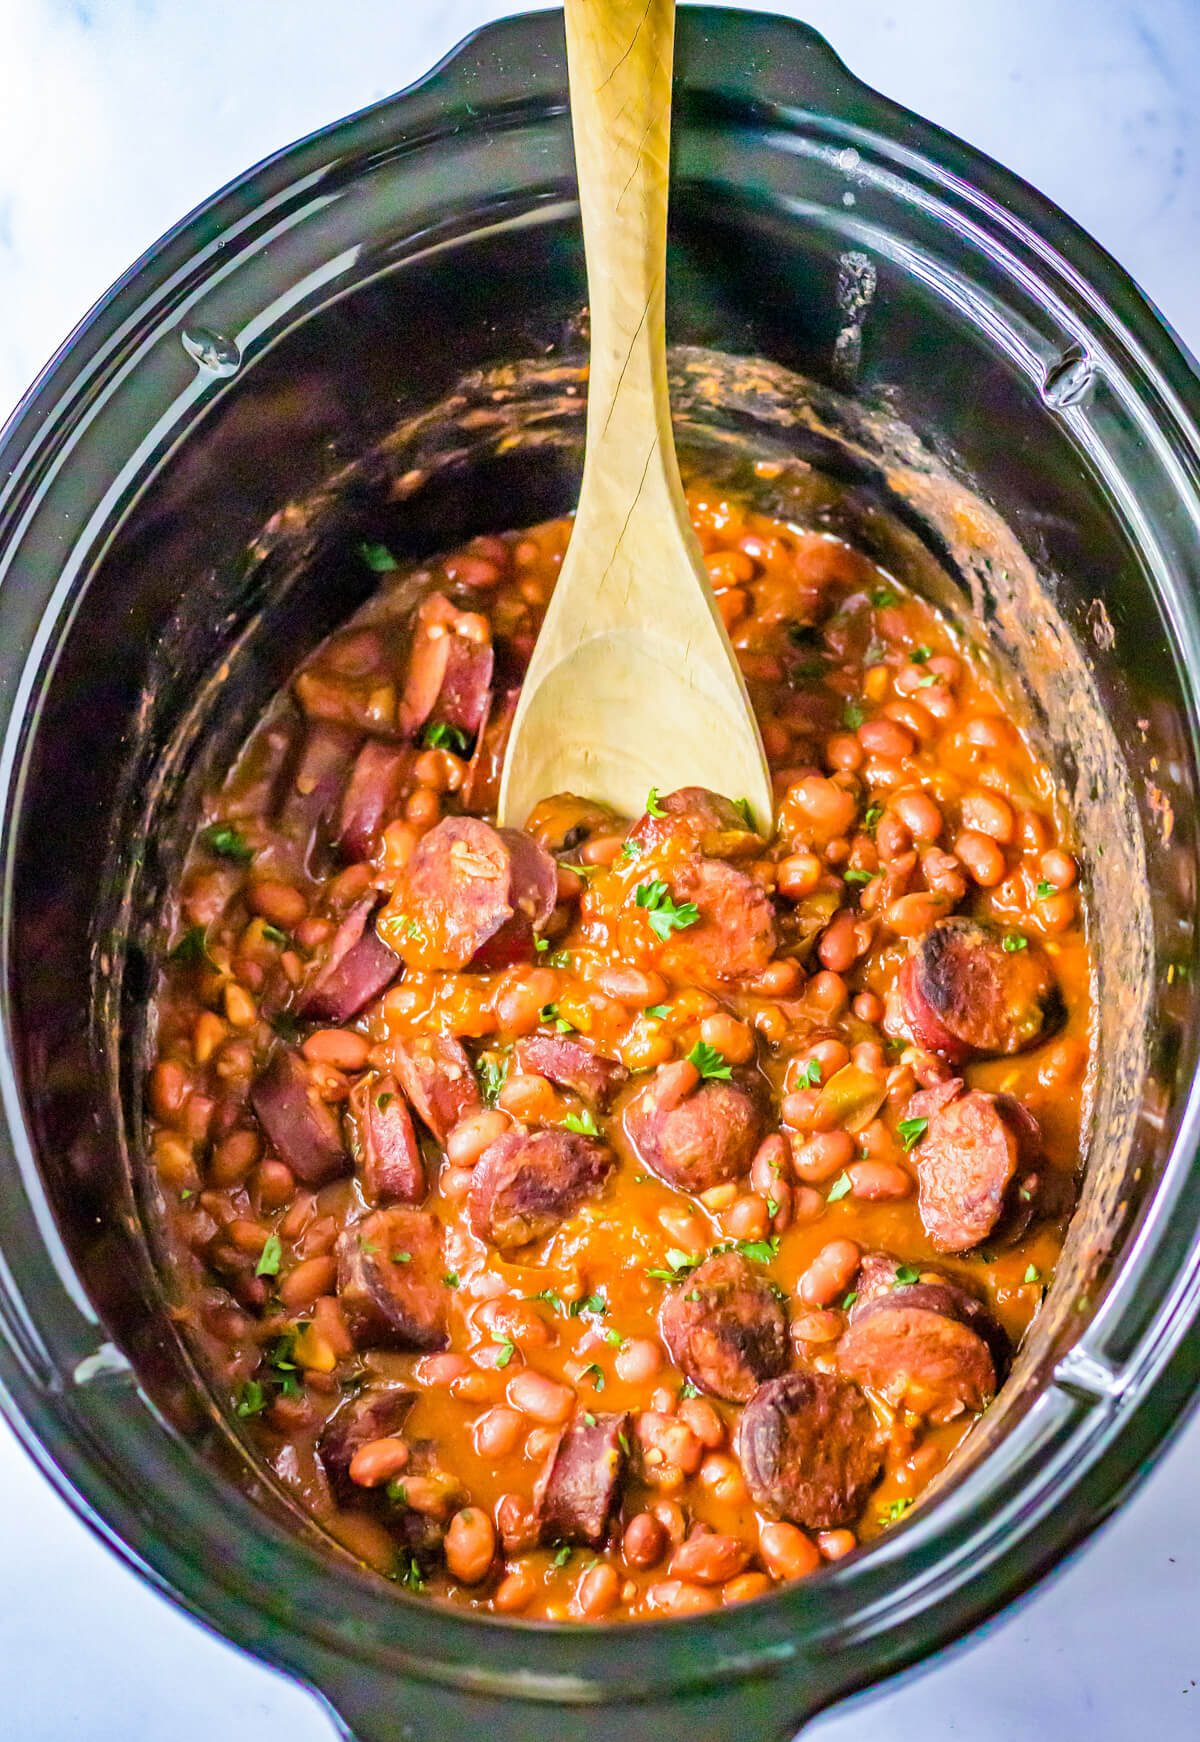 A crock pot insert containing a wooden spoon sticking into the cooked red beans and rice.